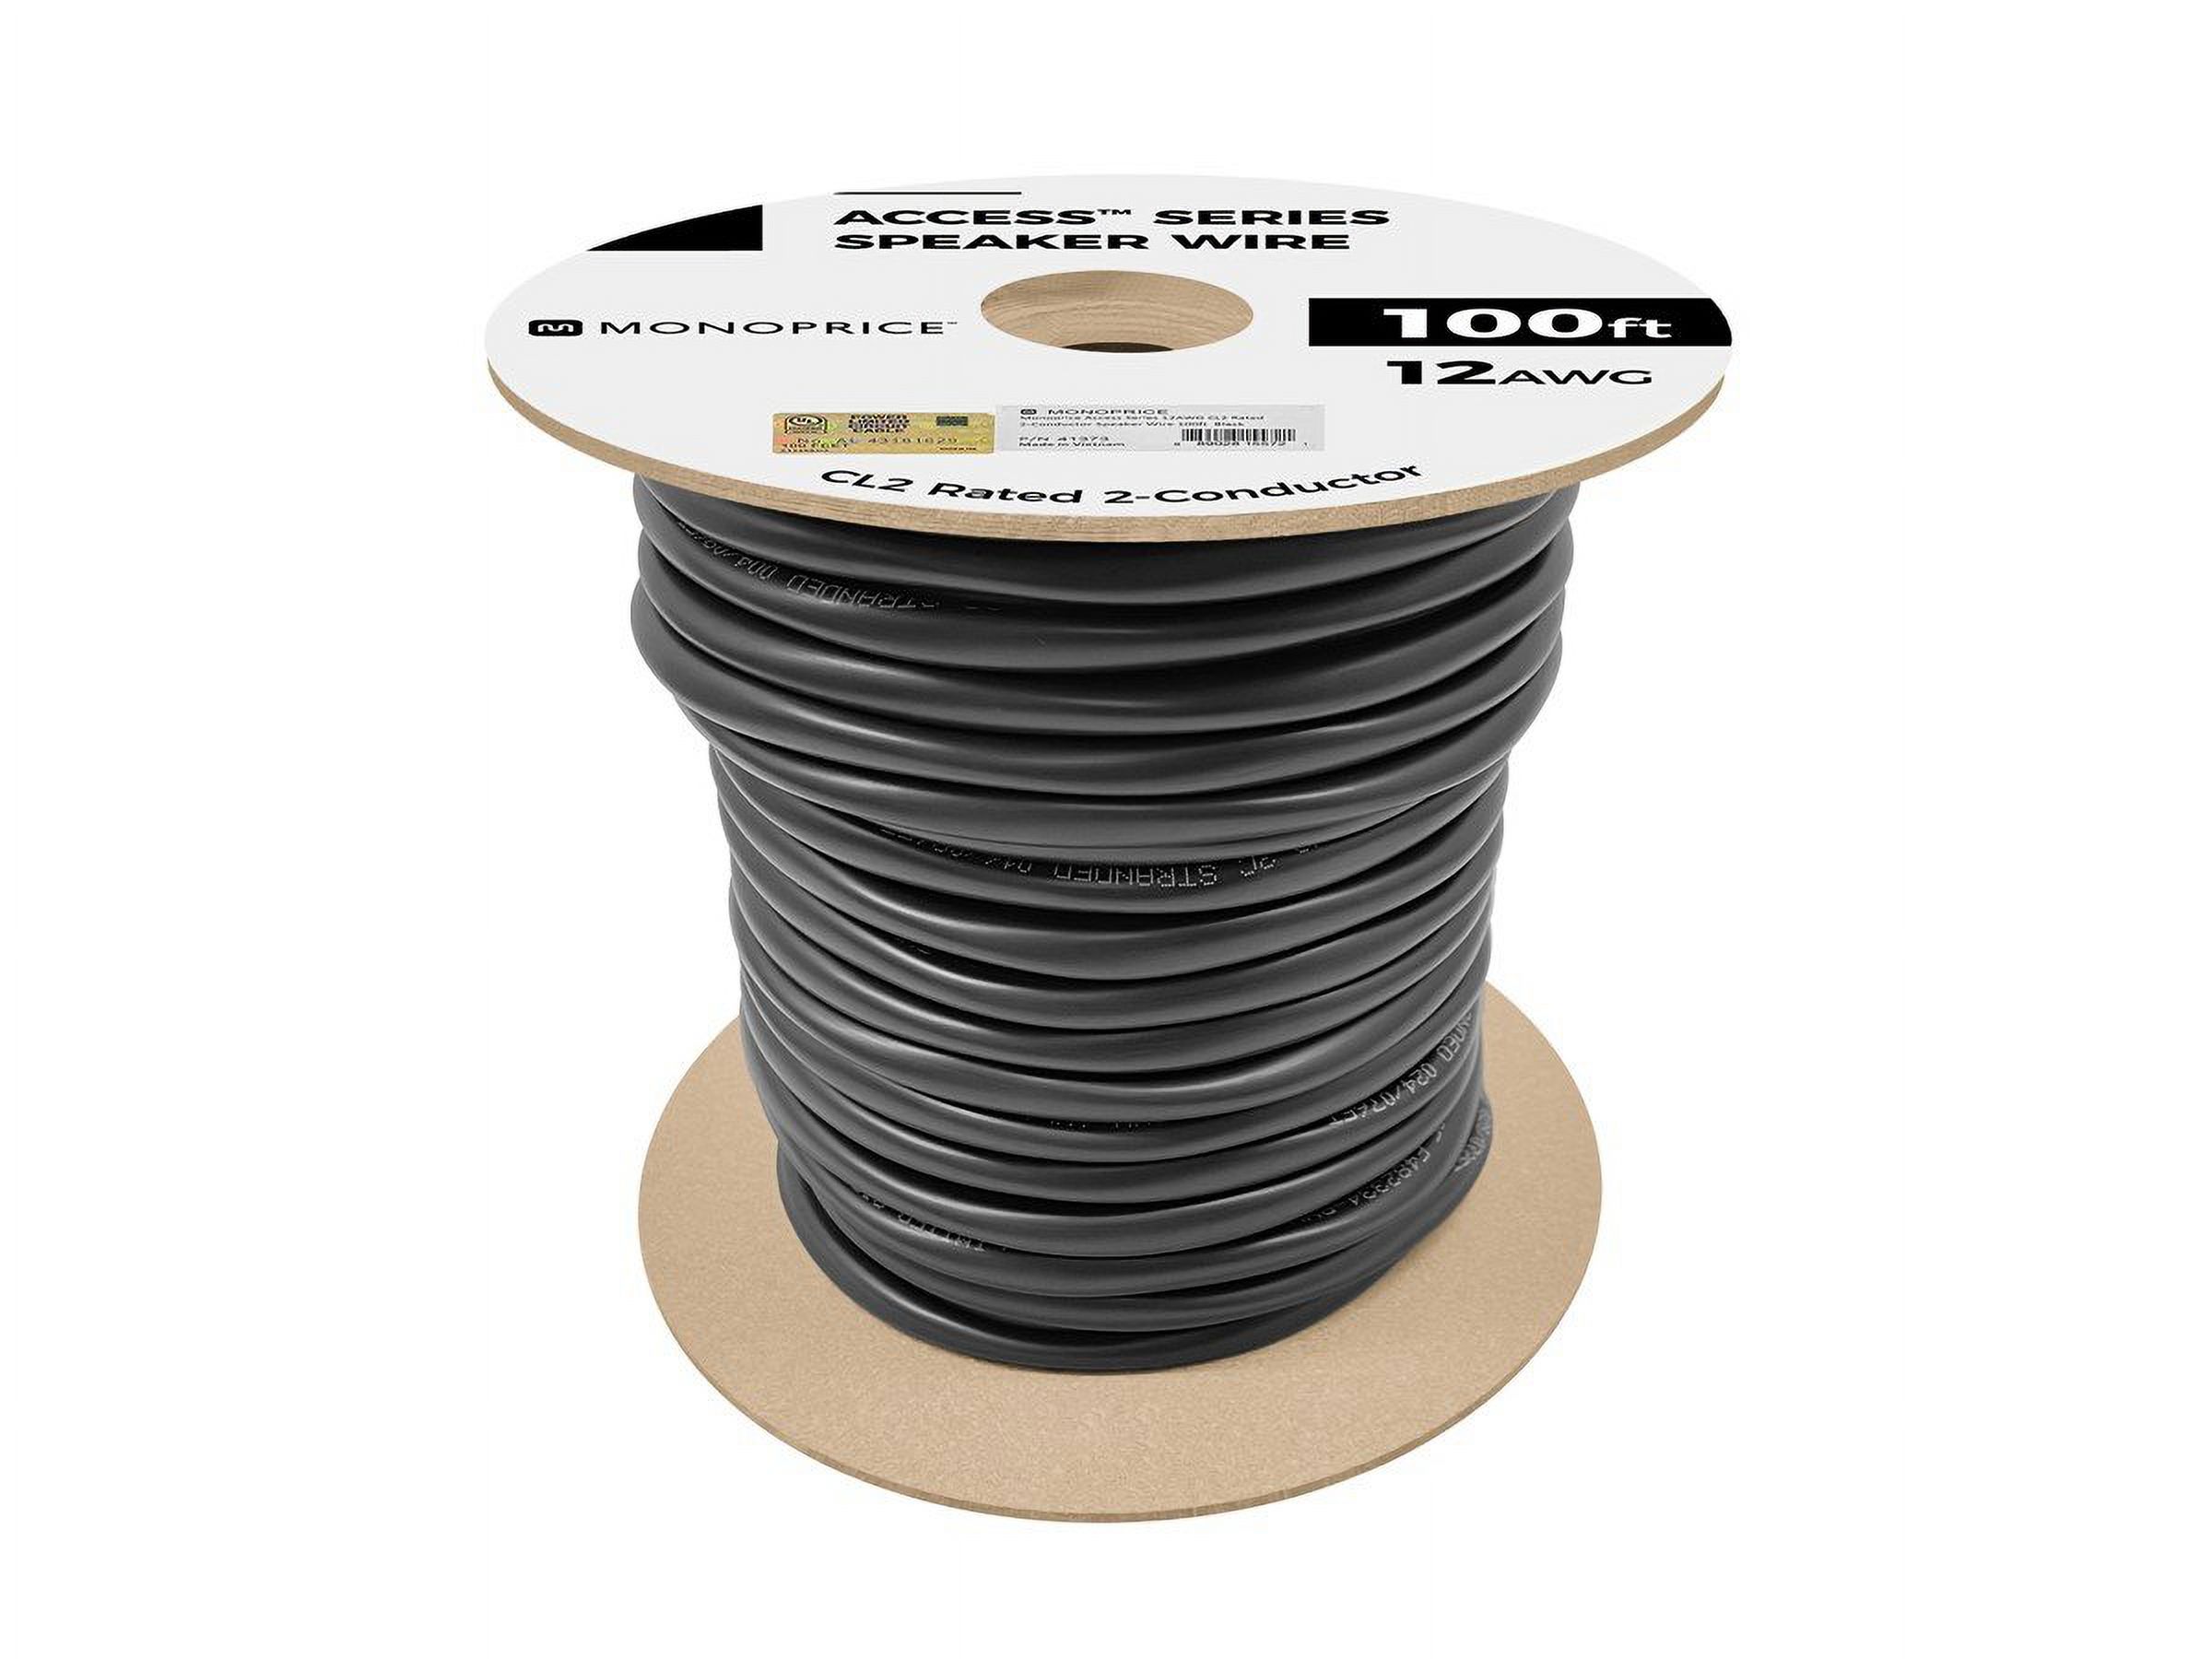 Monoprice Speaker Wire, CL2 Rated, 2-Conductor, 12AWG, 100ft, Black - image 3 of 6